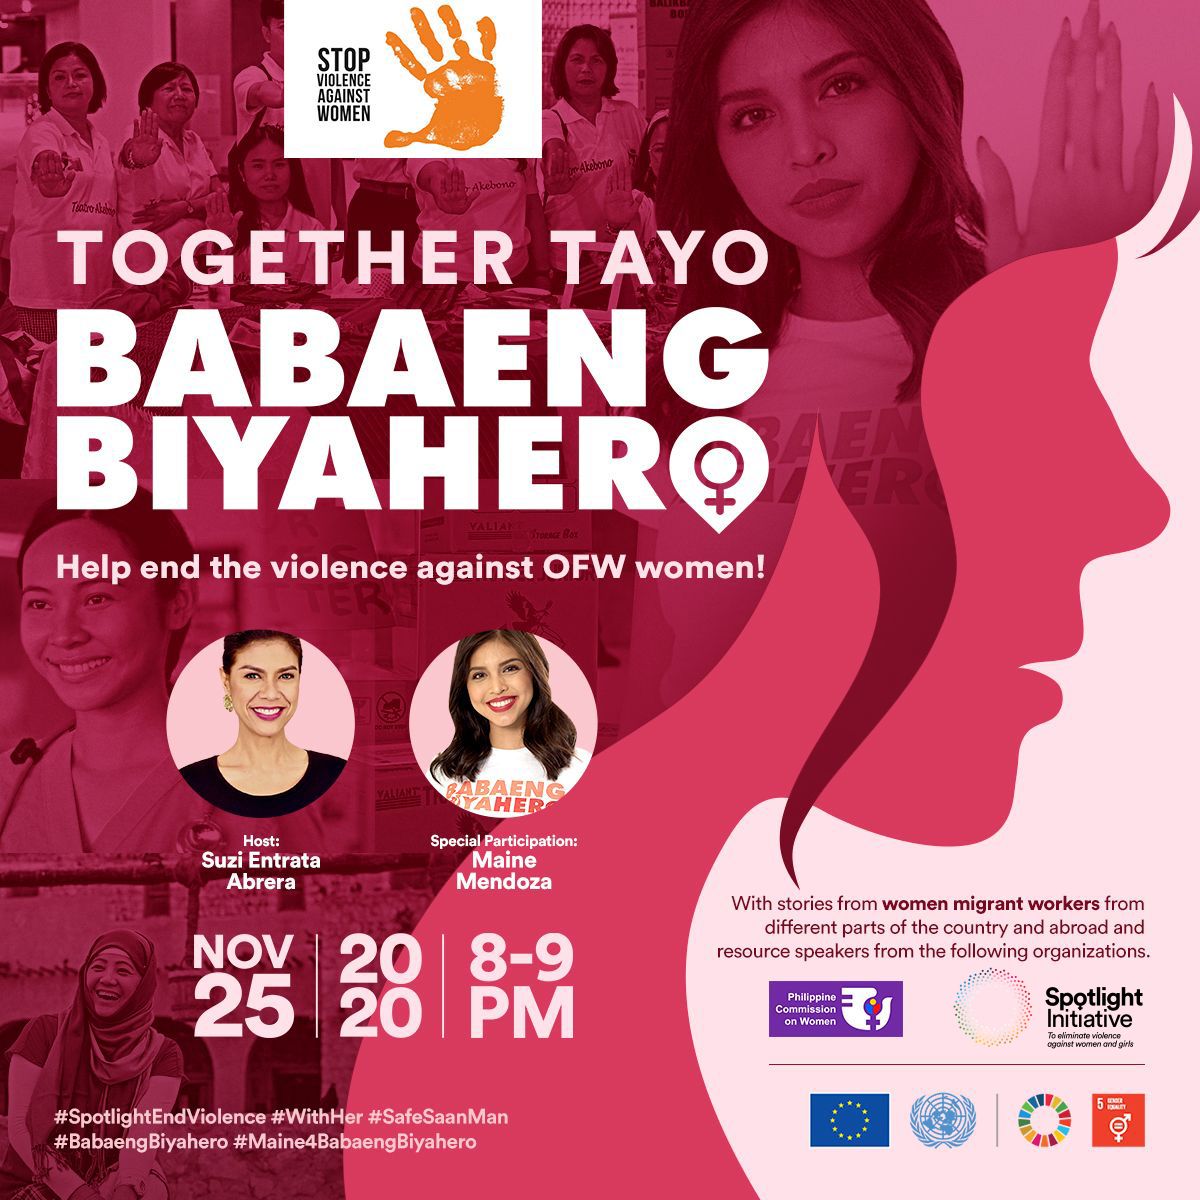 SAFE AND FAIR PHILIPPINES CELEBRATES INTERNATIONAL DAY OF ENDING VIOLENCE AGAINST WOMEN